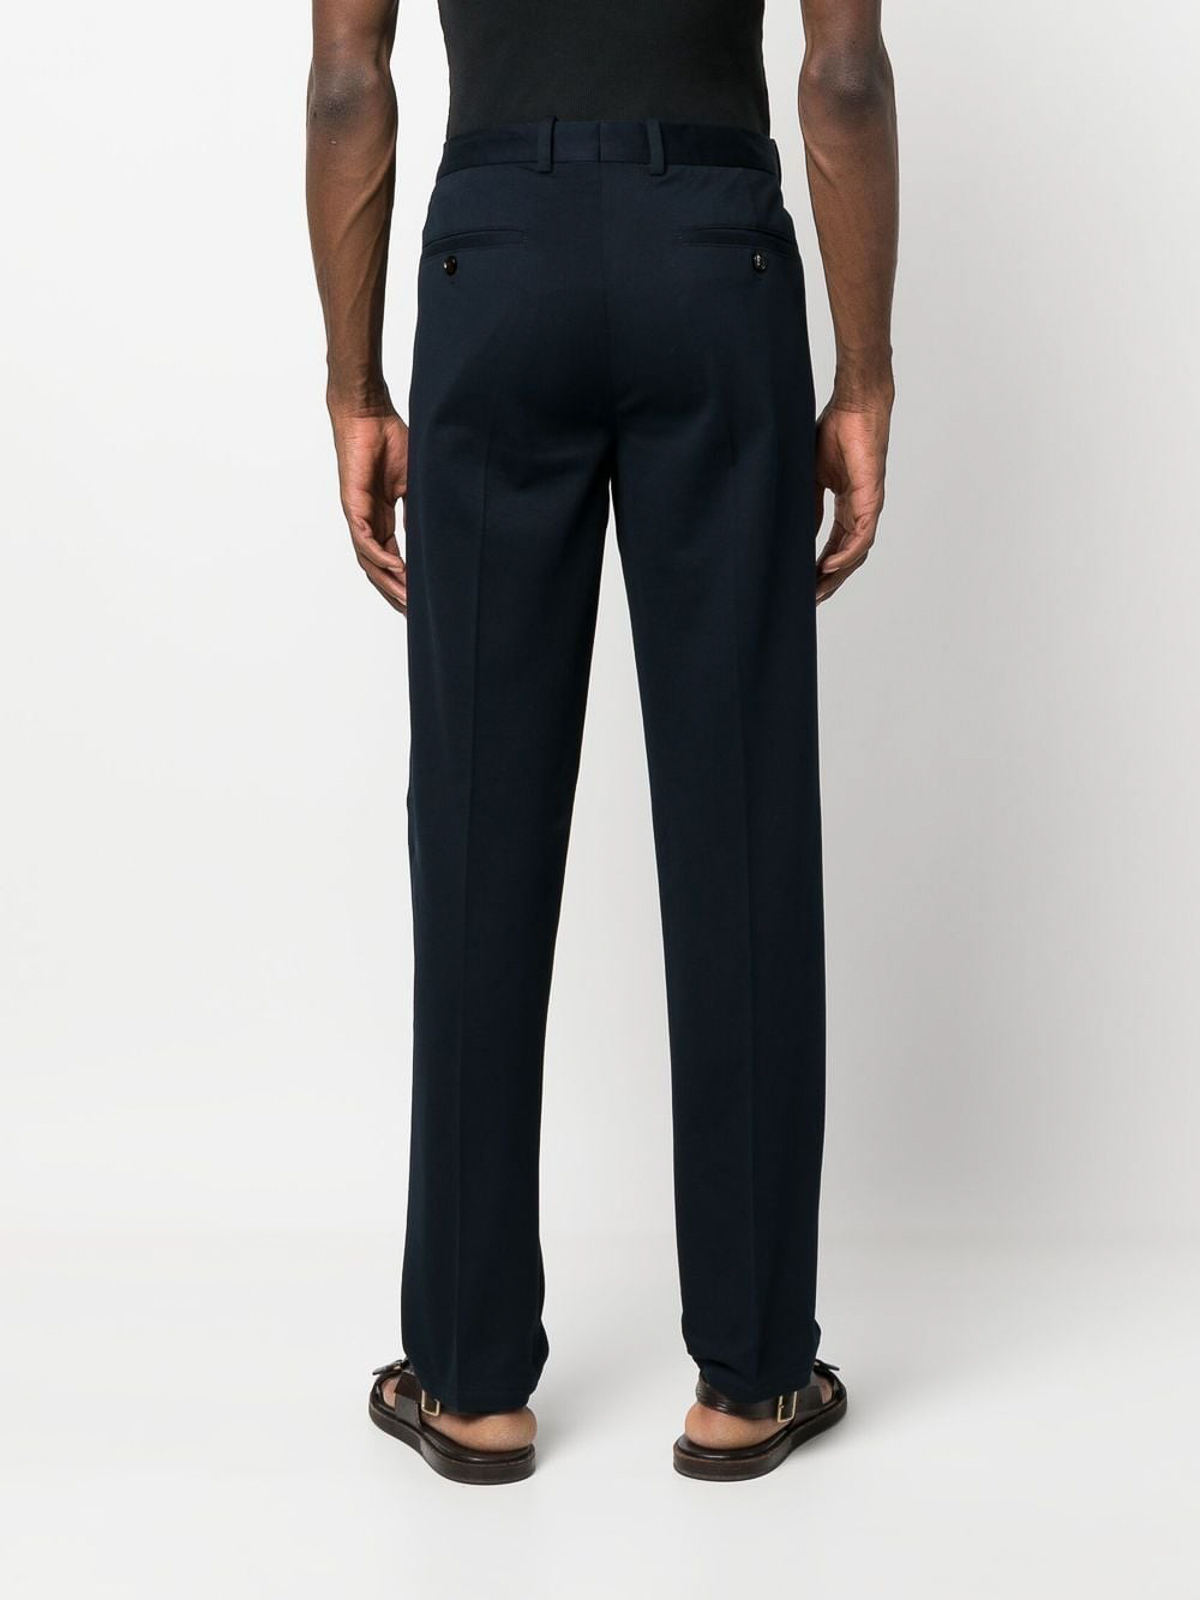 Reiss Fold-End On End Tailored Trousers, Light Grey at John Lewis & Partners